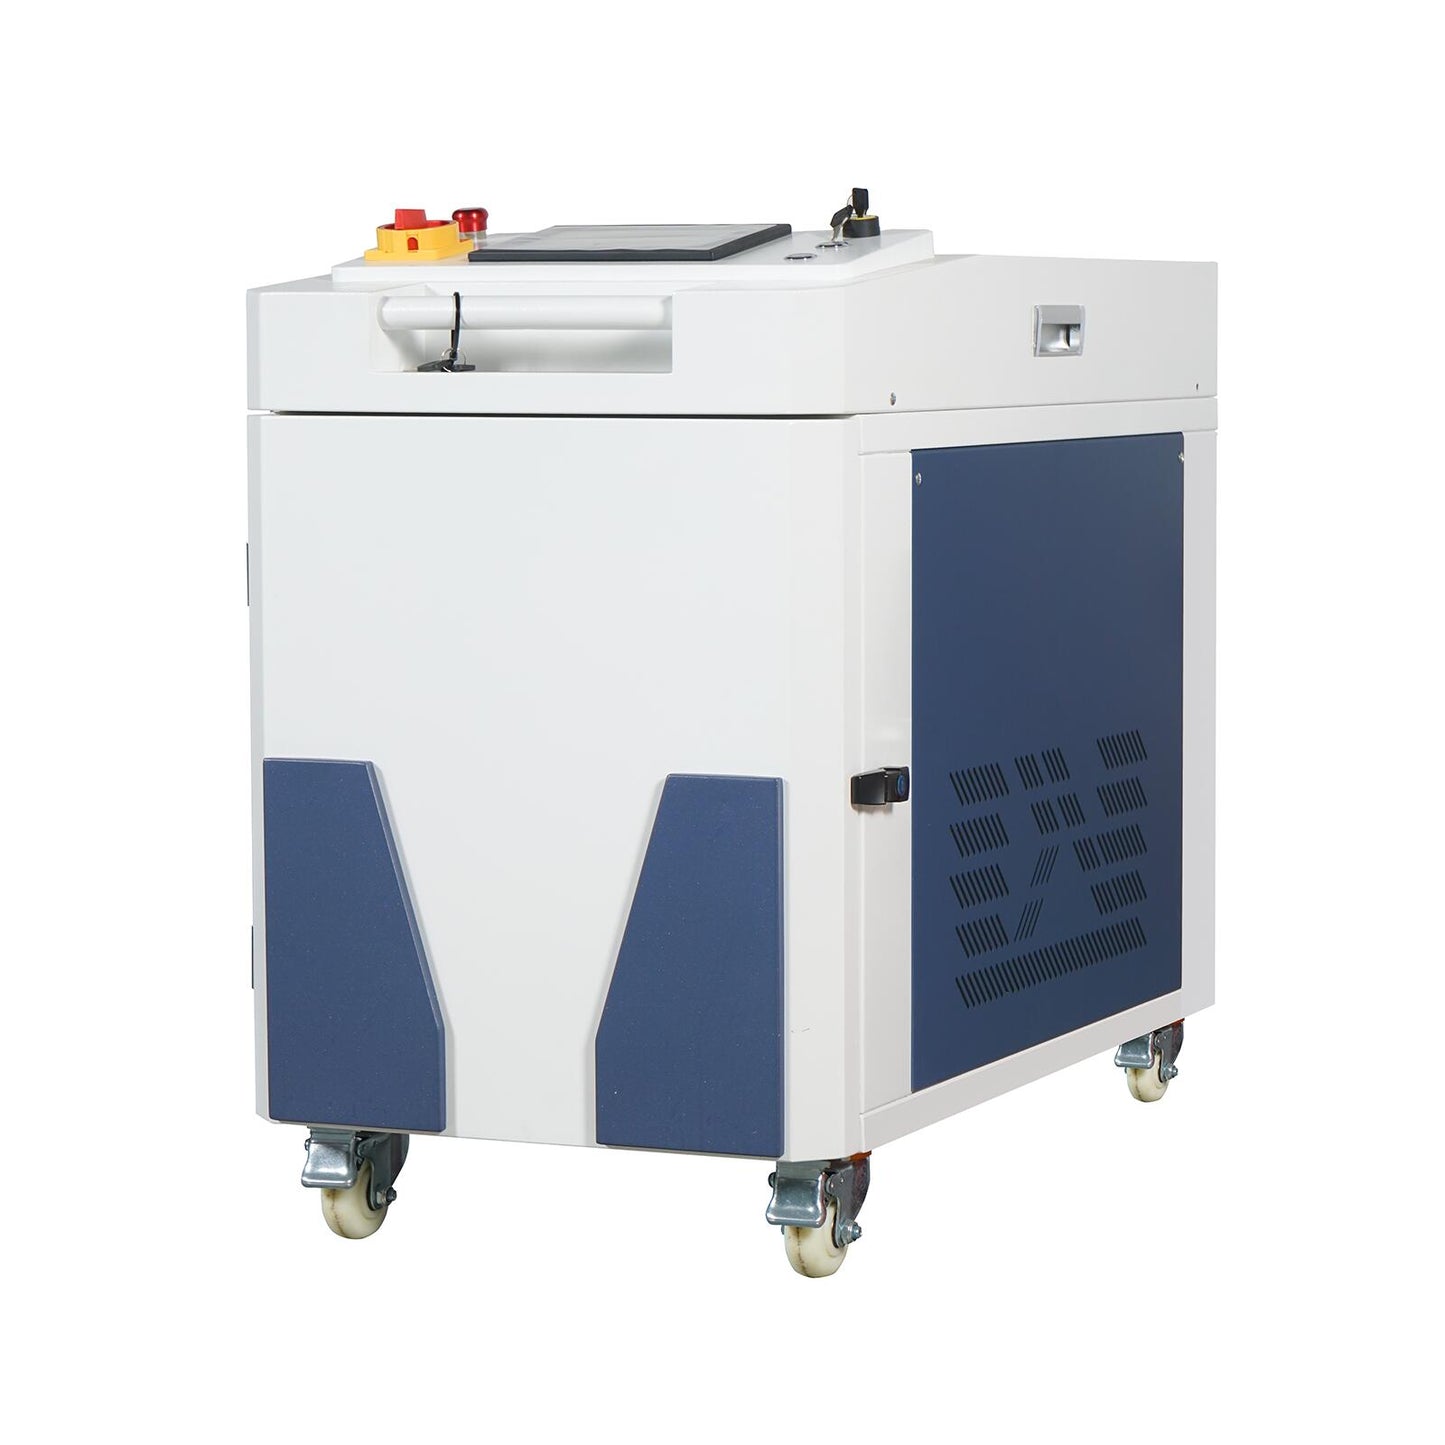 MCWlaser 1000W/1500W/2000W Fiber Laser Cleaner for Metal Rust Removal Paint Oil and Coating Cleaning